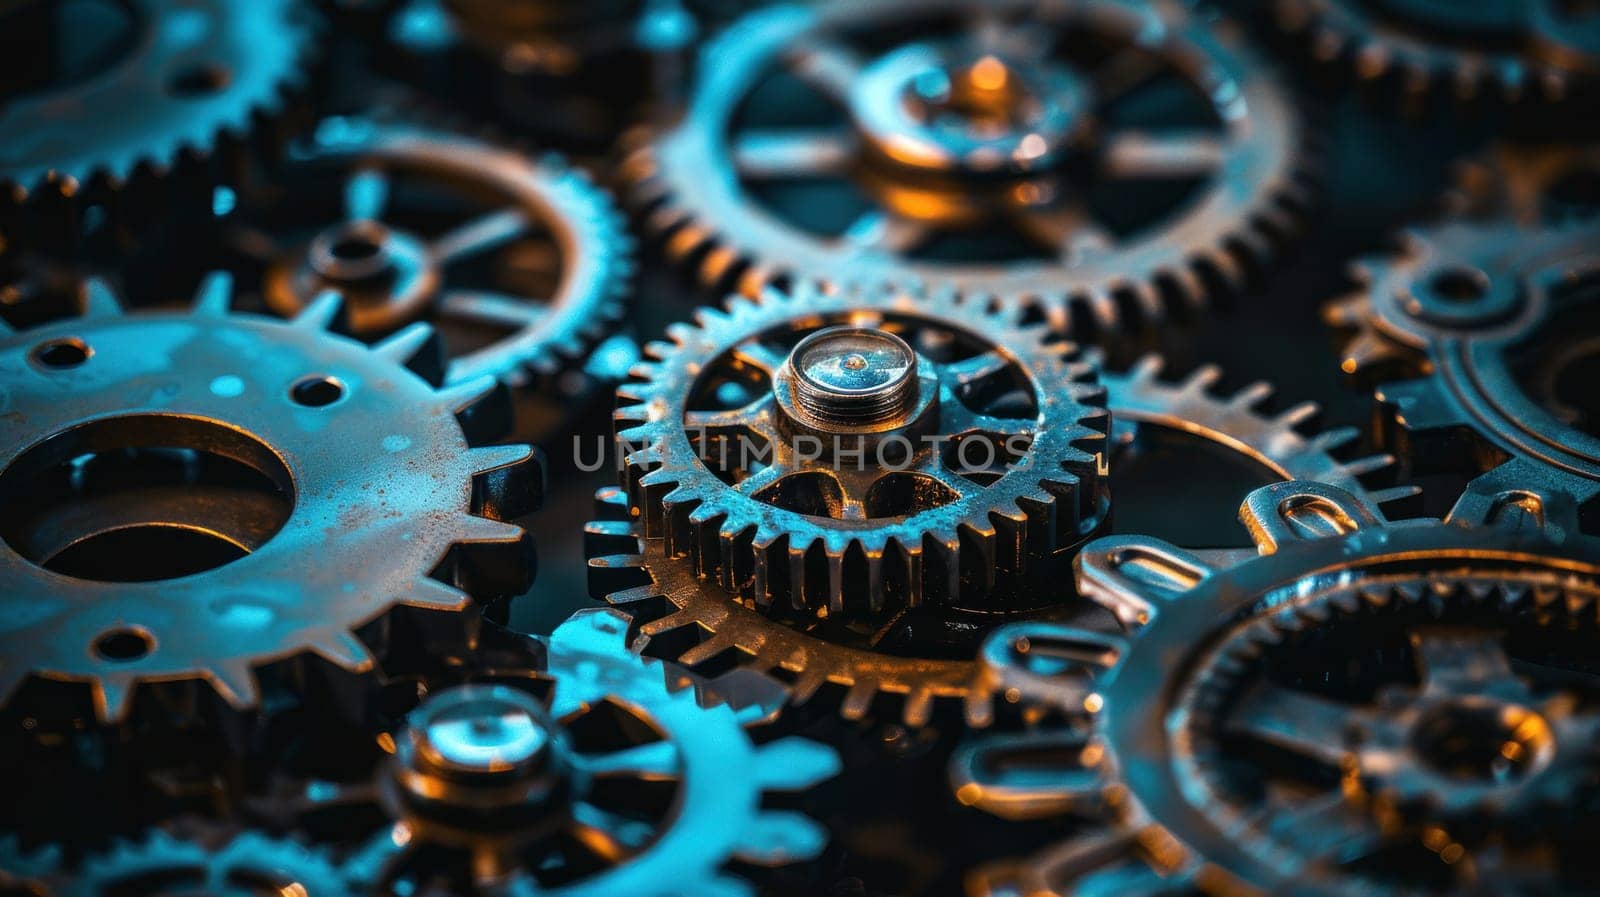 A close up of many gears with a blue and yellow tint. The gears are all different sizes and shapes, but they all have a similar design. Concept of complexity and precision